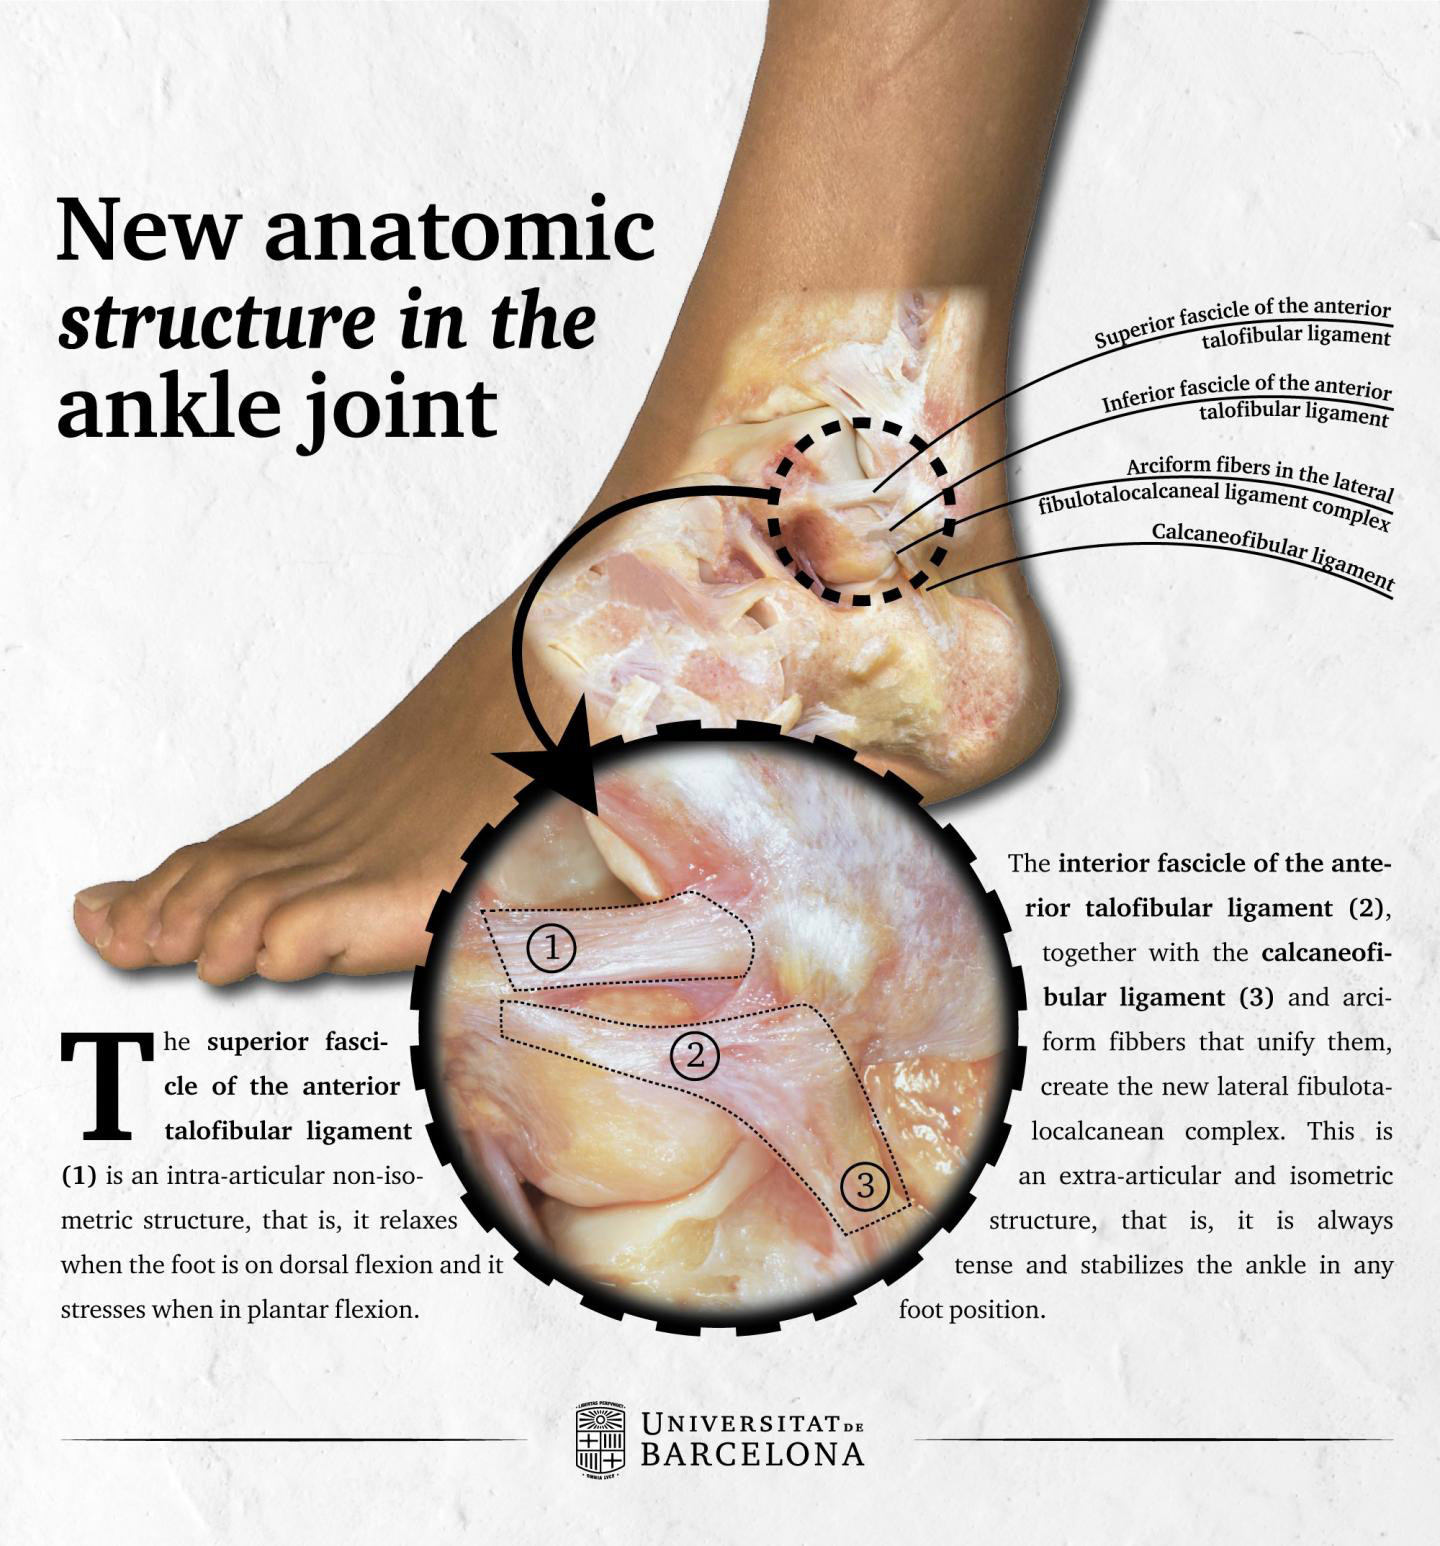 Barcelona Researchers Describe New Anatomic Structure In Ankle